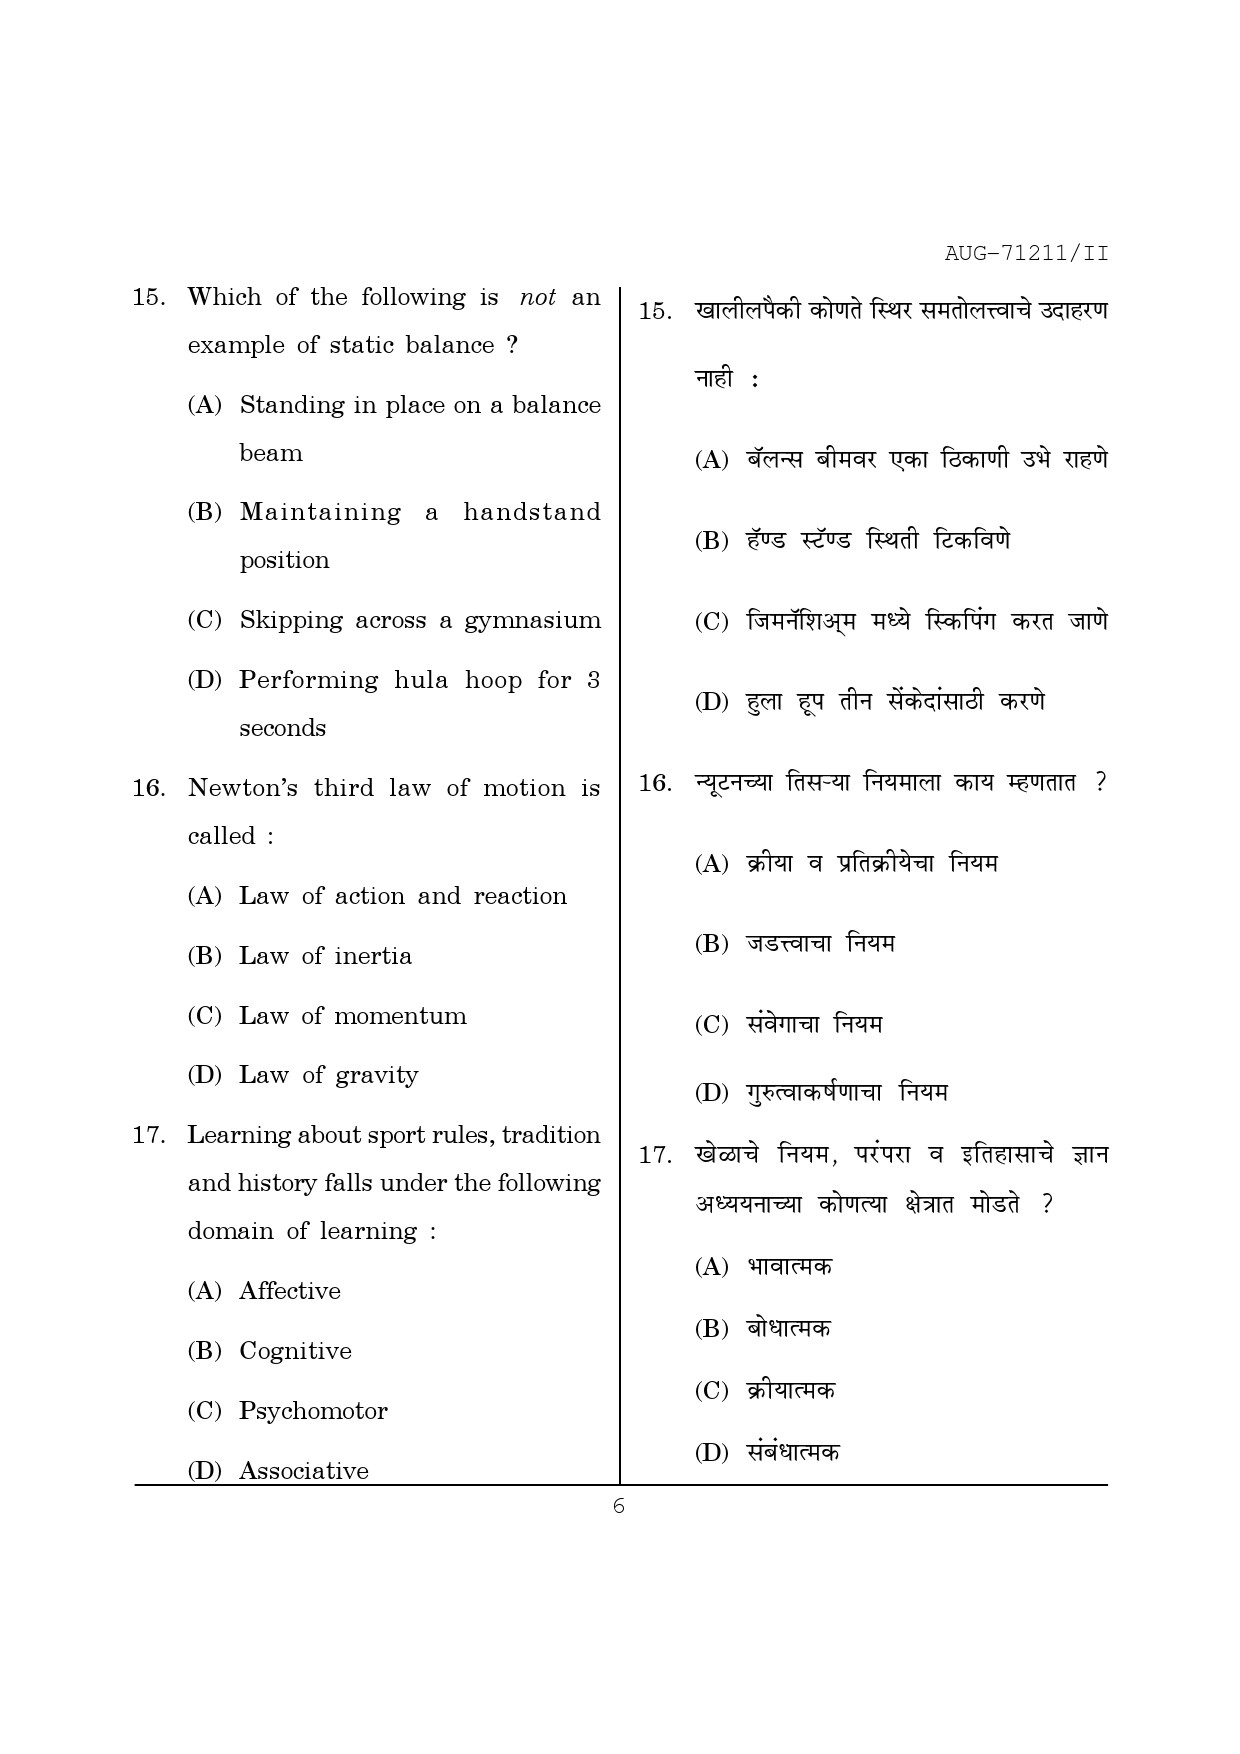 Maharashtra SET Physical Education Question Paper II August 2011 6